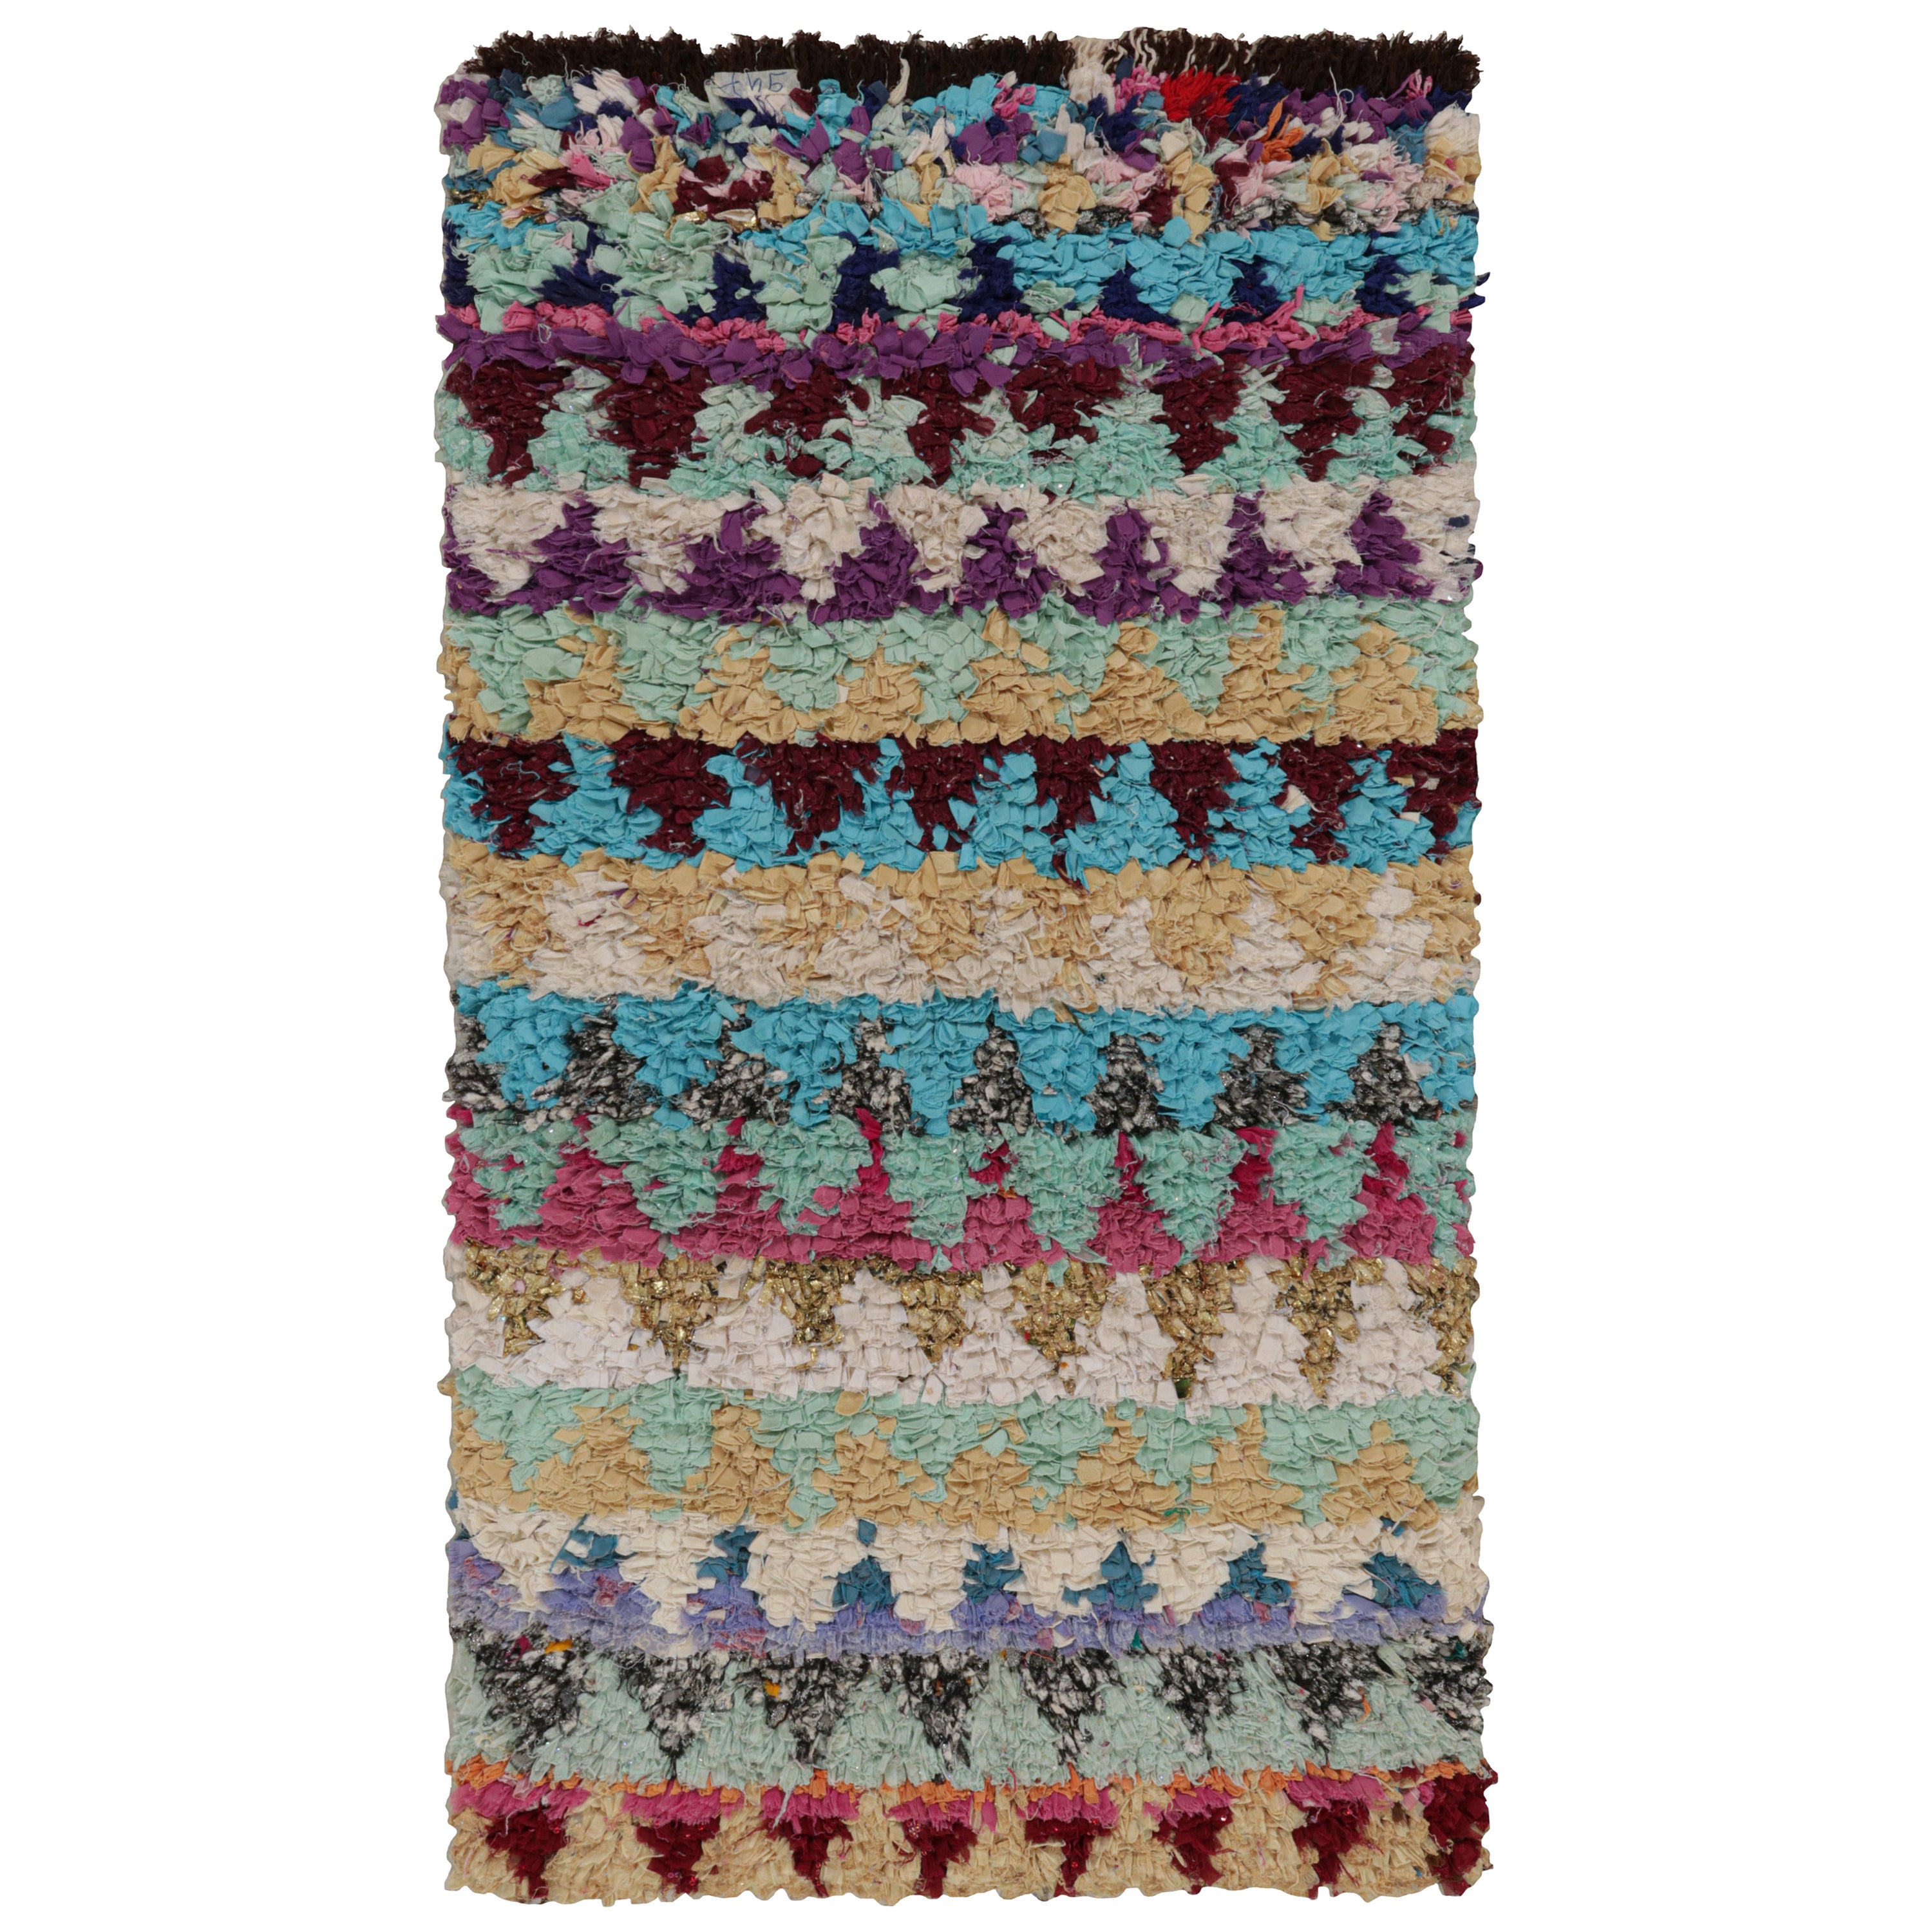 Vintage Azilal Moroccan Boucherouite Rug, with Chevron Patterns from Rug & Kilim